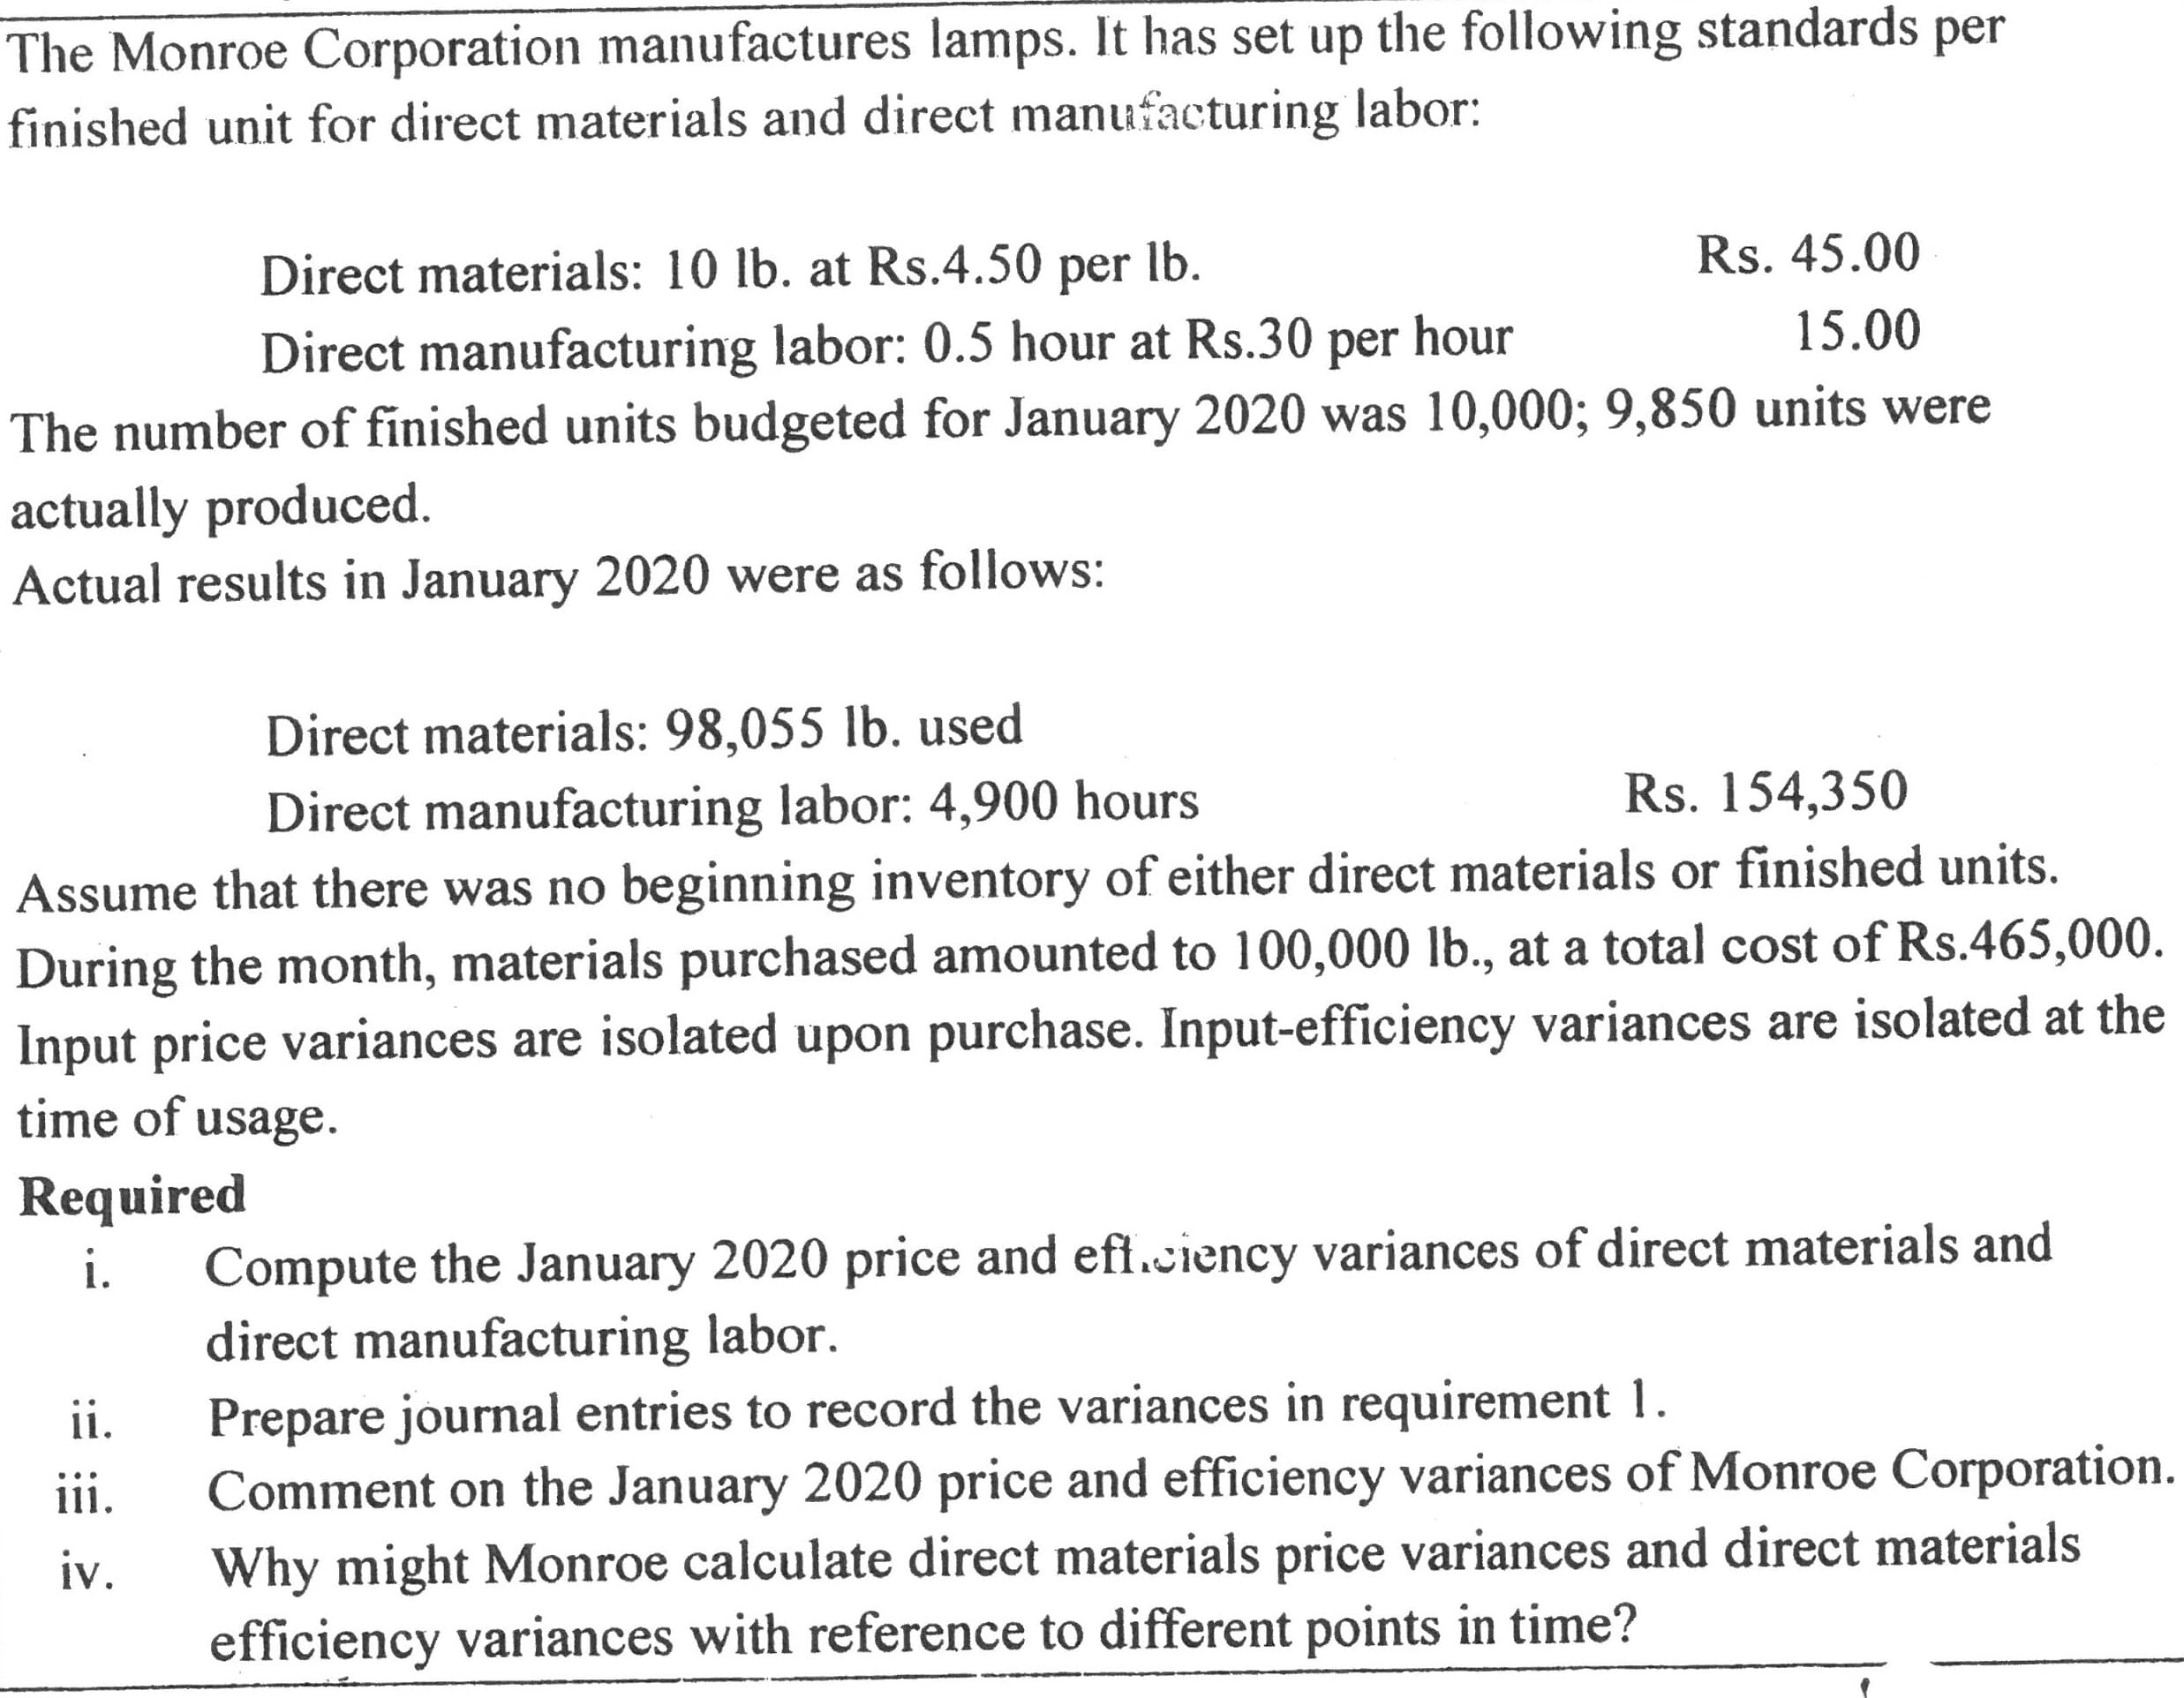 The Monroe Corporation manufactures lamps. It has set up the following standards per
finished unit for direct materials and direct manufacturing labor:
Rs. 45.00
Direct materials: 10 lb. at Rs.4.50 per lb.
15.00
Direct manufacturing labor: 0.5 hour at Rs.30 per hour
The number of finished units budgeted for January 2020 was 10,000; 9,850 units were
actually produced.
Actual results in January 2020 were as follows:
Direct materials: 98,055 lb. used
Direct manufacturing labor: 4,900 hours
Rs. 154,350
Assume that there was no beginning inventory of either direct materials or finished units.
During the month, materials purchased amounted to 100,000 lb., at a total cost of Rs.465,000.
Input price variances are isolated upon purchase. Input-efficiency variances are isolated at the
time of usage.
Required
Compute the January 2020 price and eff.ciency variances of direct materials and
direct manufacturing labor.
Prepare journal entries to record the variances in requirement 1.
Comment on the January 2020 price and efficiency variances of Monroe Corporation.
Why might Monroe calculate direct materials price variances and direct materials
efficiency variances with reference to different points in time?
i.
ii.
ii.
iv.
